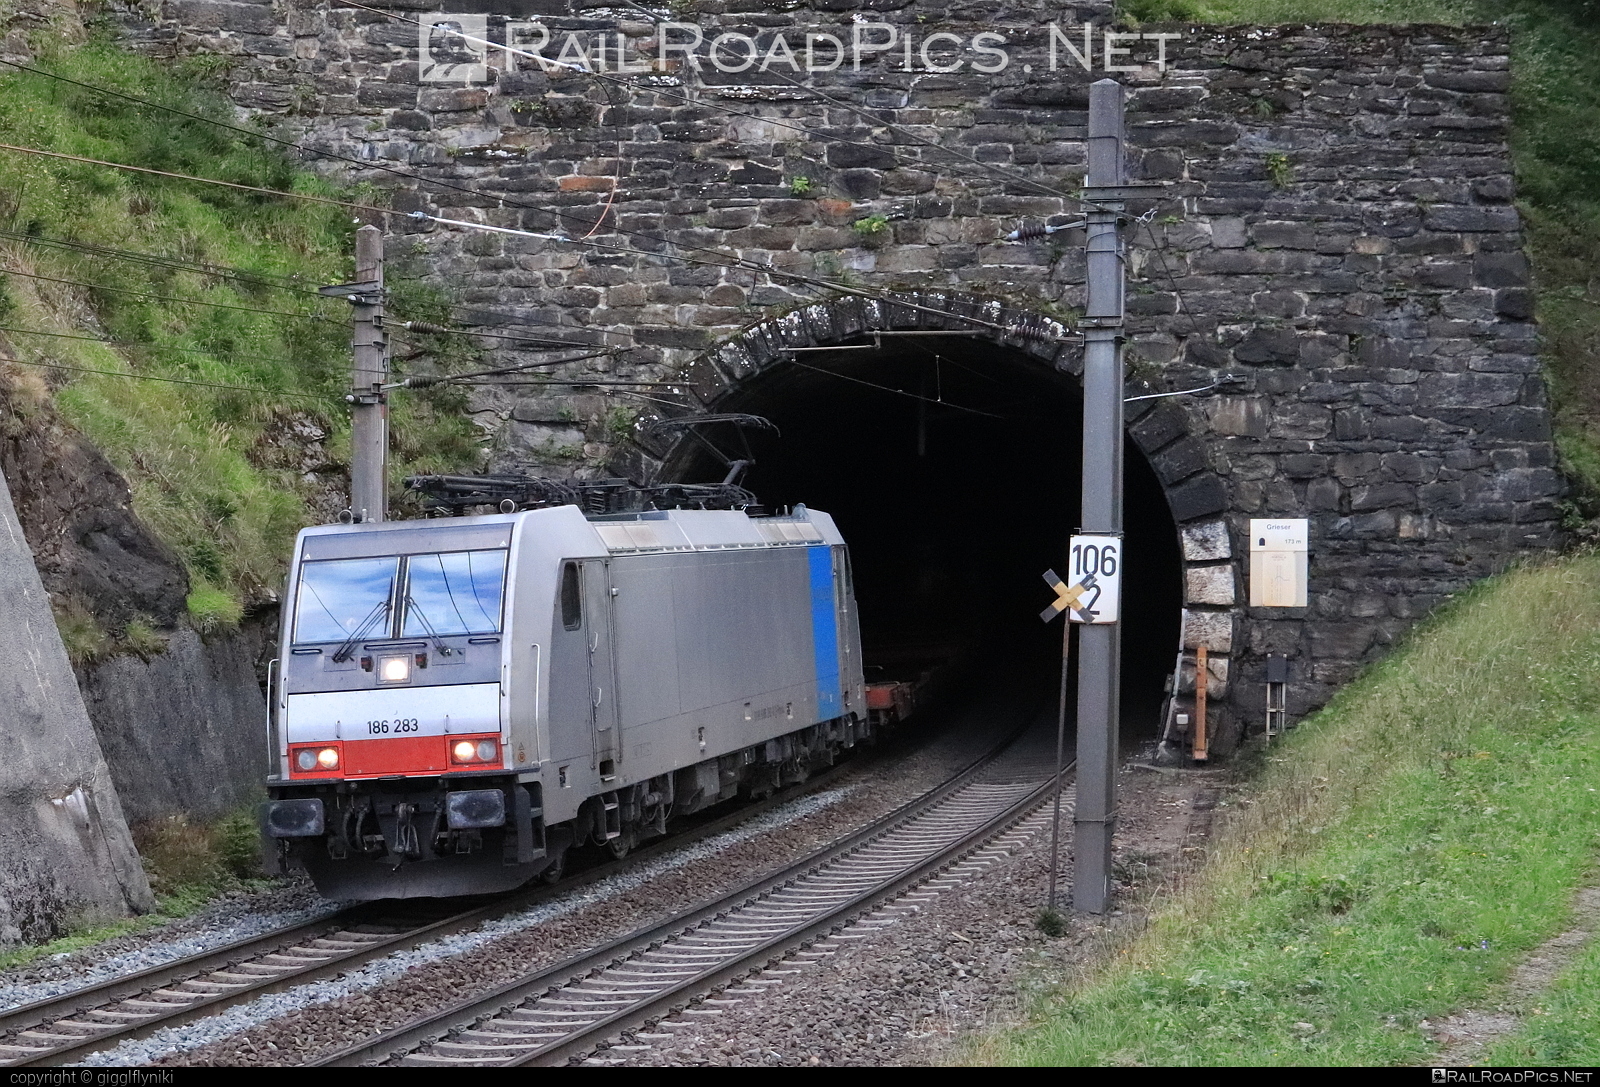 Bombardier TRAXX F140 MS - 186 283 operated by Rail Cargo Carrier – Italy s.r.l #bombardier #bombardiertraxx #railpool #railpoolgmbh #rccit #traxx #traxxf140 #traxxf140ms #tunnel